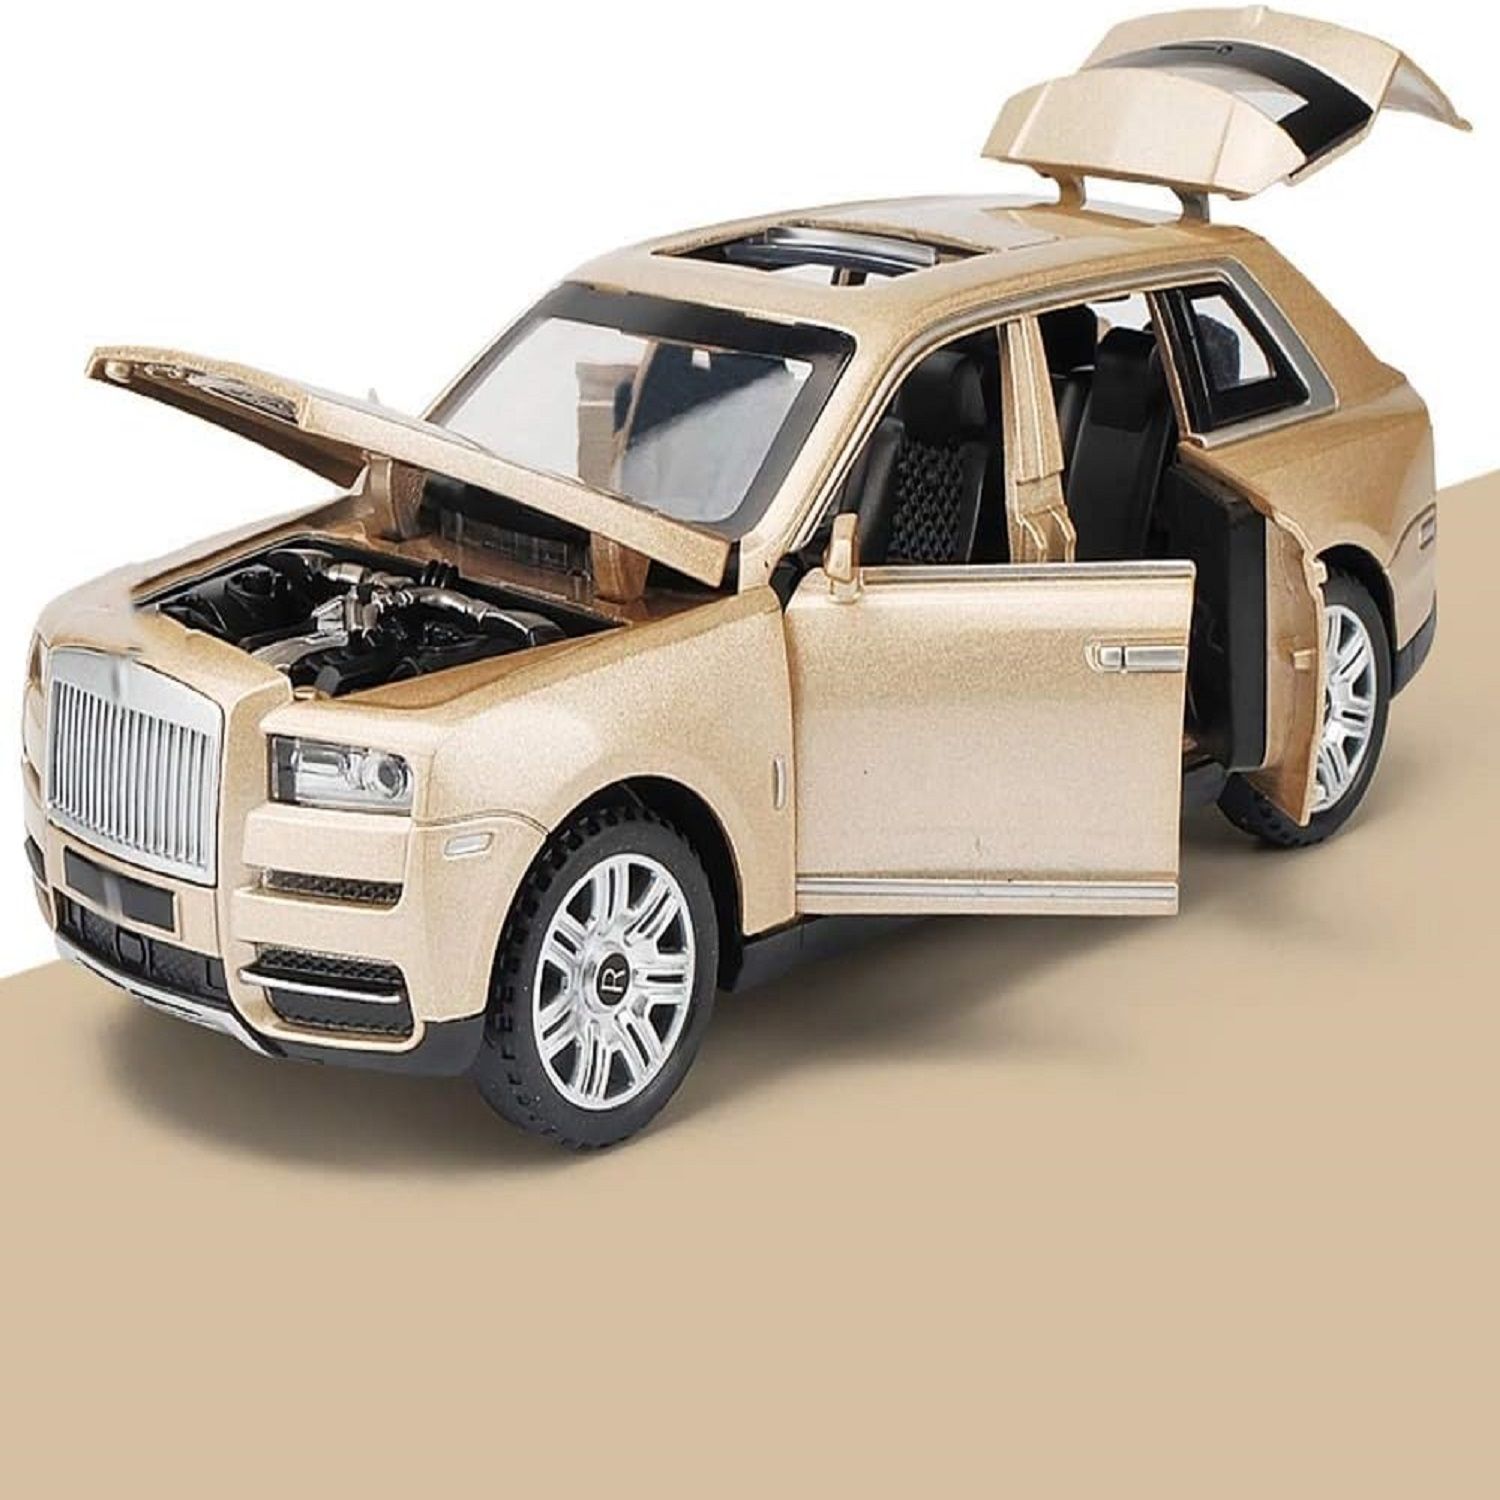 KTRS ENTERPRISE 1:32 Rolls Royce Cullinan Diecast Metal Pullback Toy car with Openable Doors & Light, Music Boys Gifts Toys for Kids - Multicolor